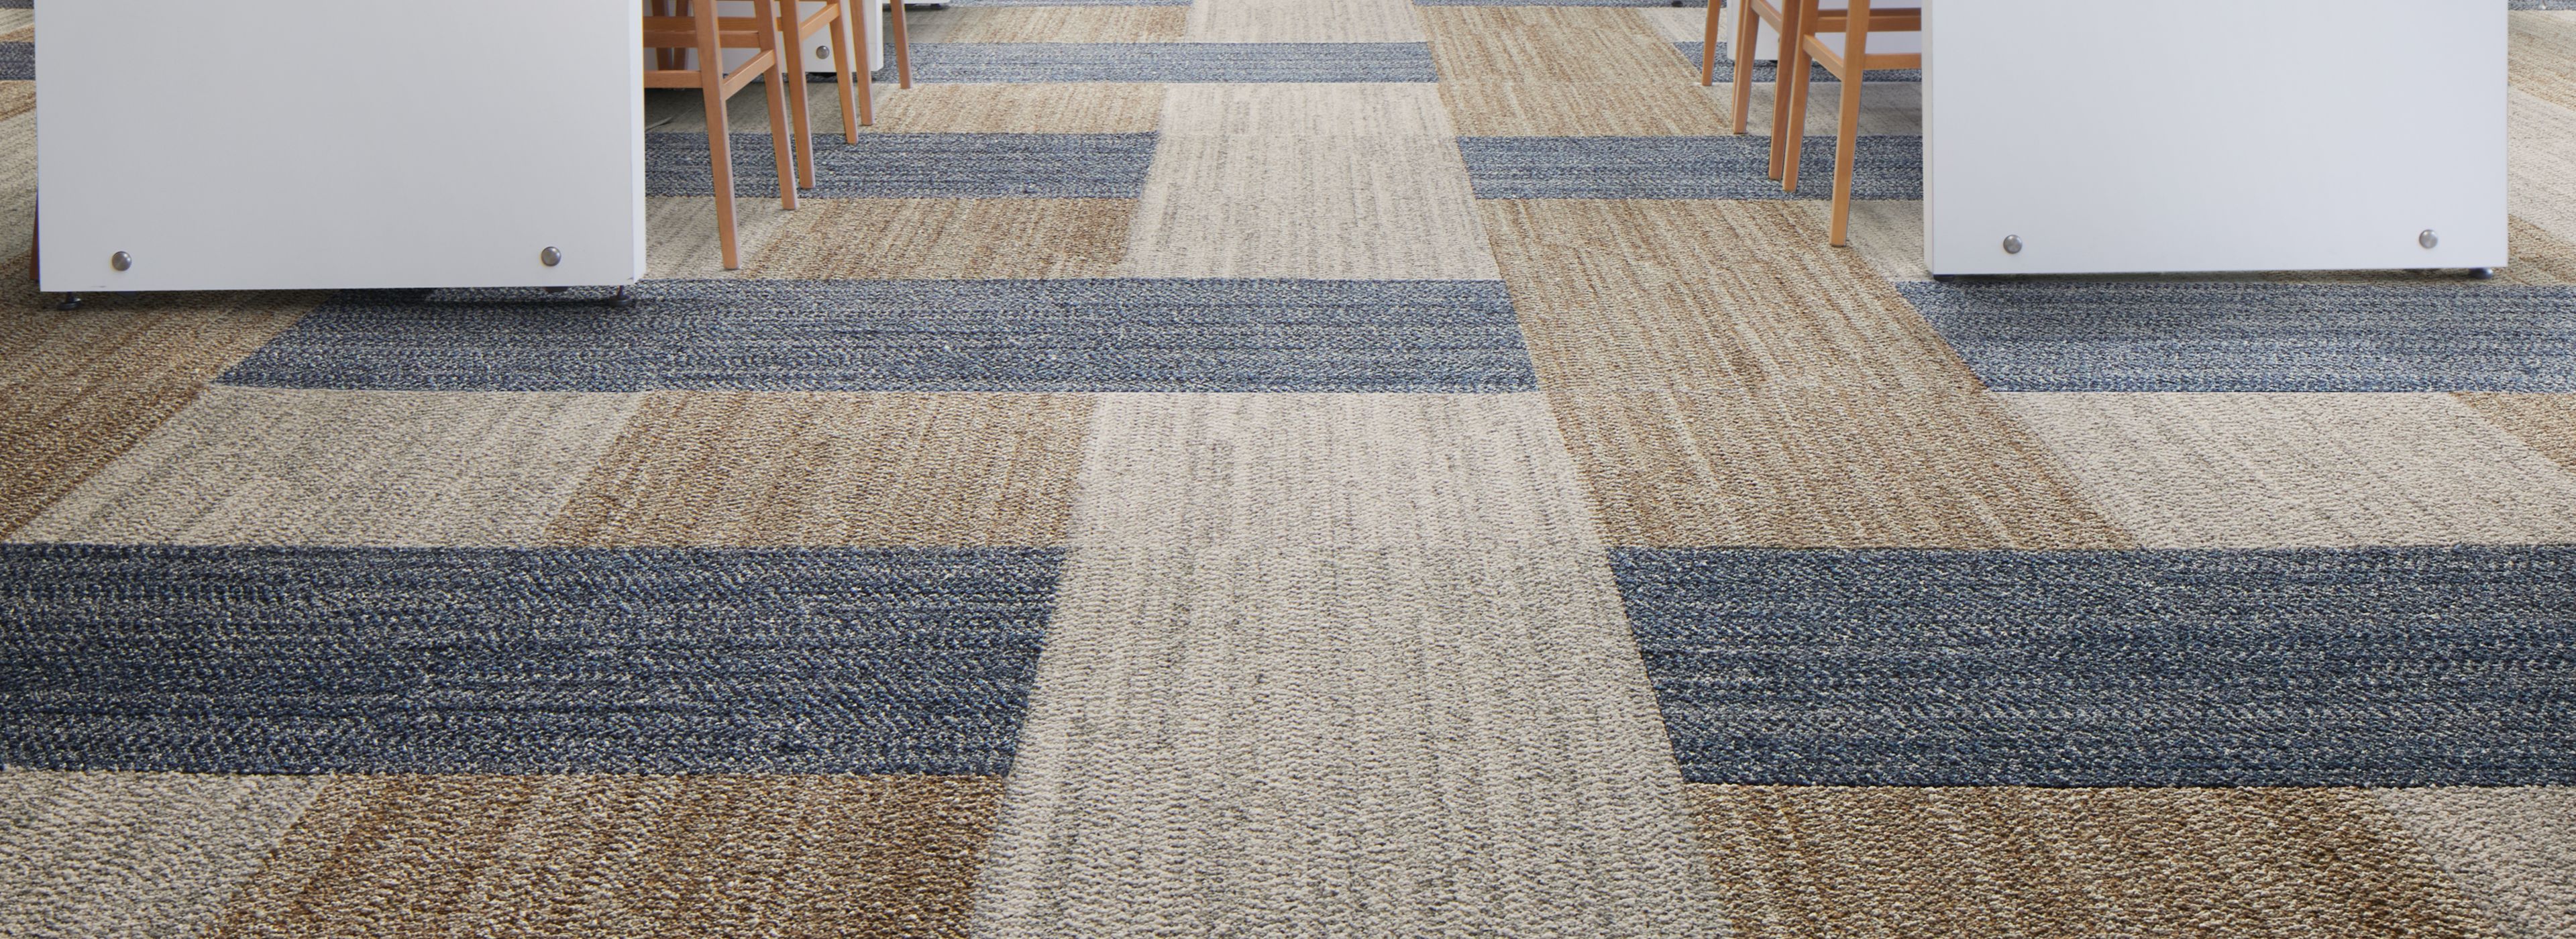 Interface Third Space 307 carpet tile in casual dining seating area numéro d’image 1